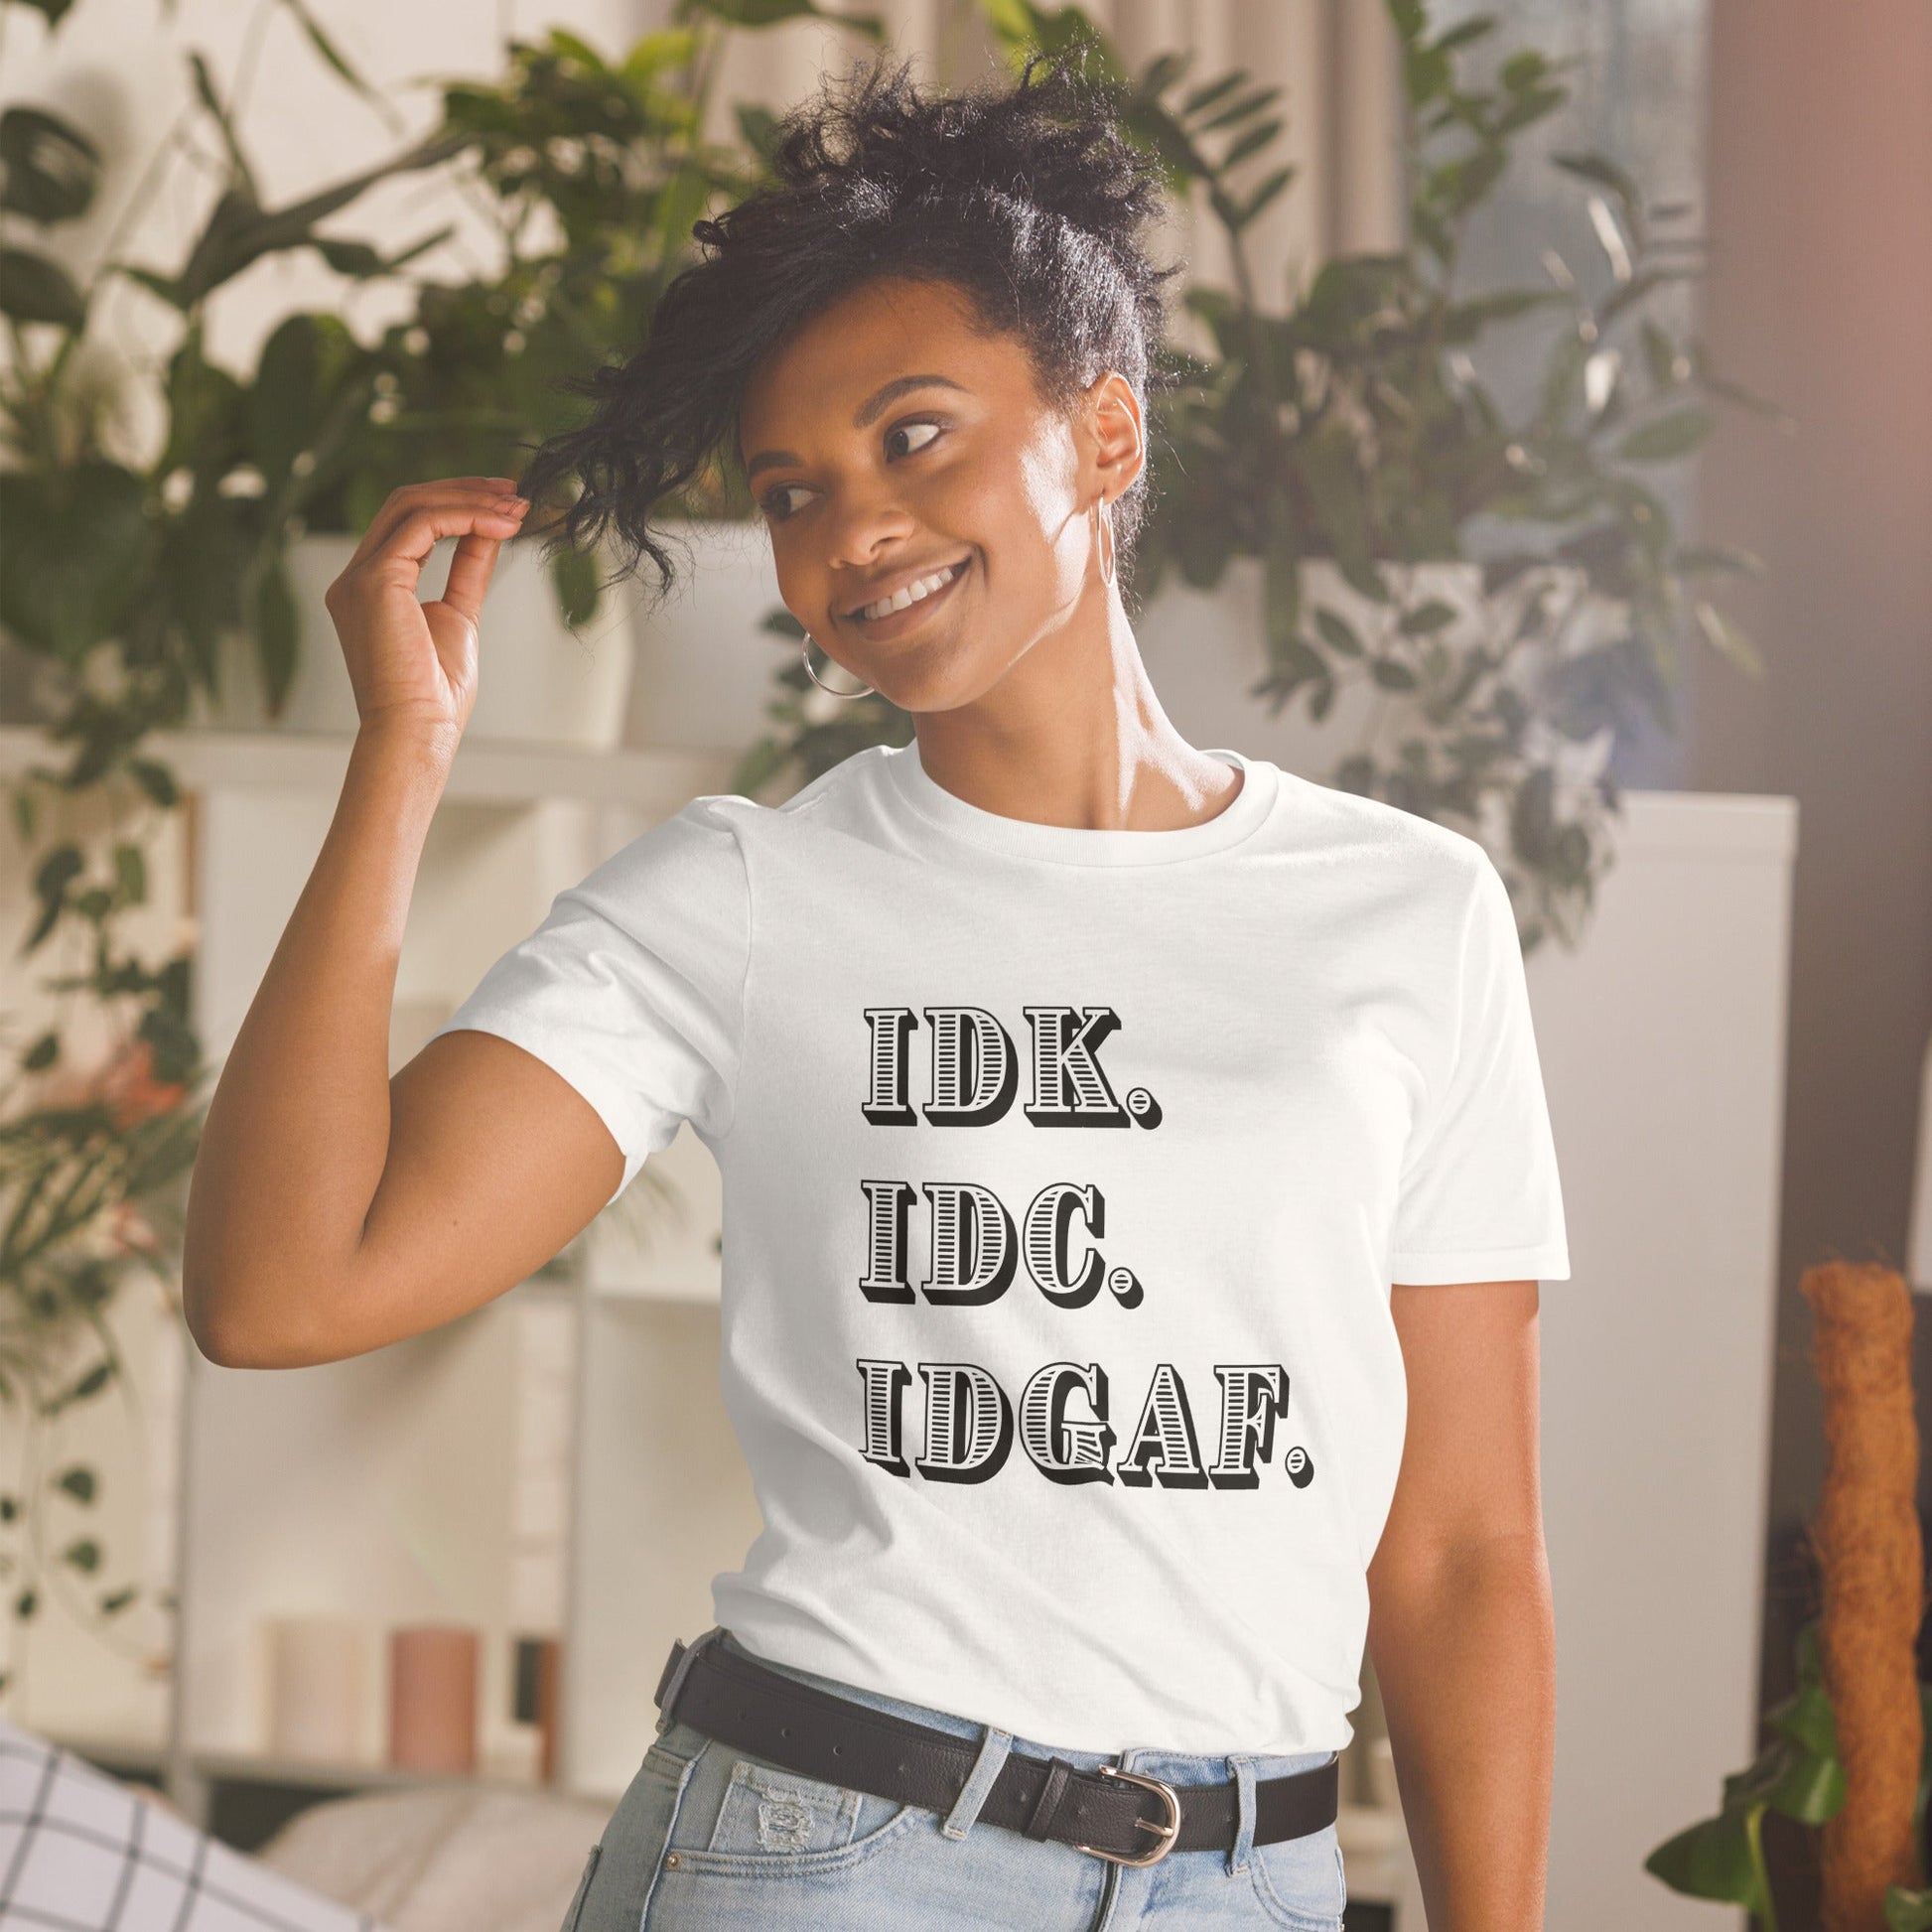 iDK. IDC. IDGAF Short-Sleeve Unisex T-Shirt (For a Slim Fit Order a Size Down) - Catch This Tea Shirts